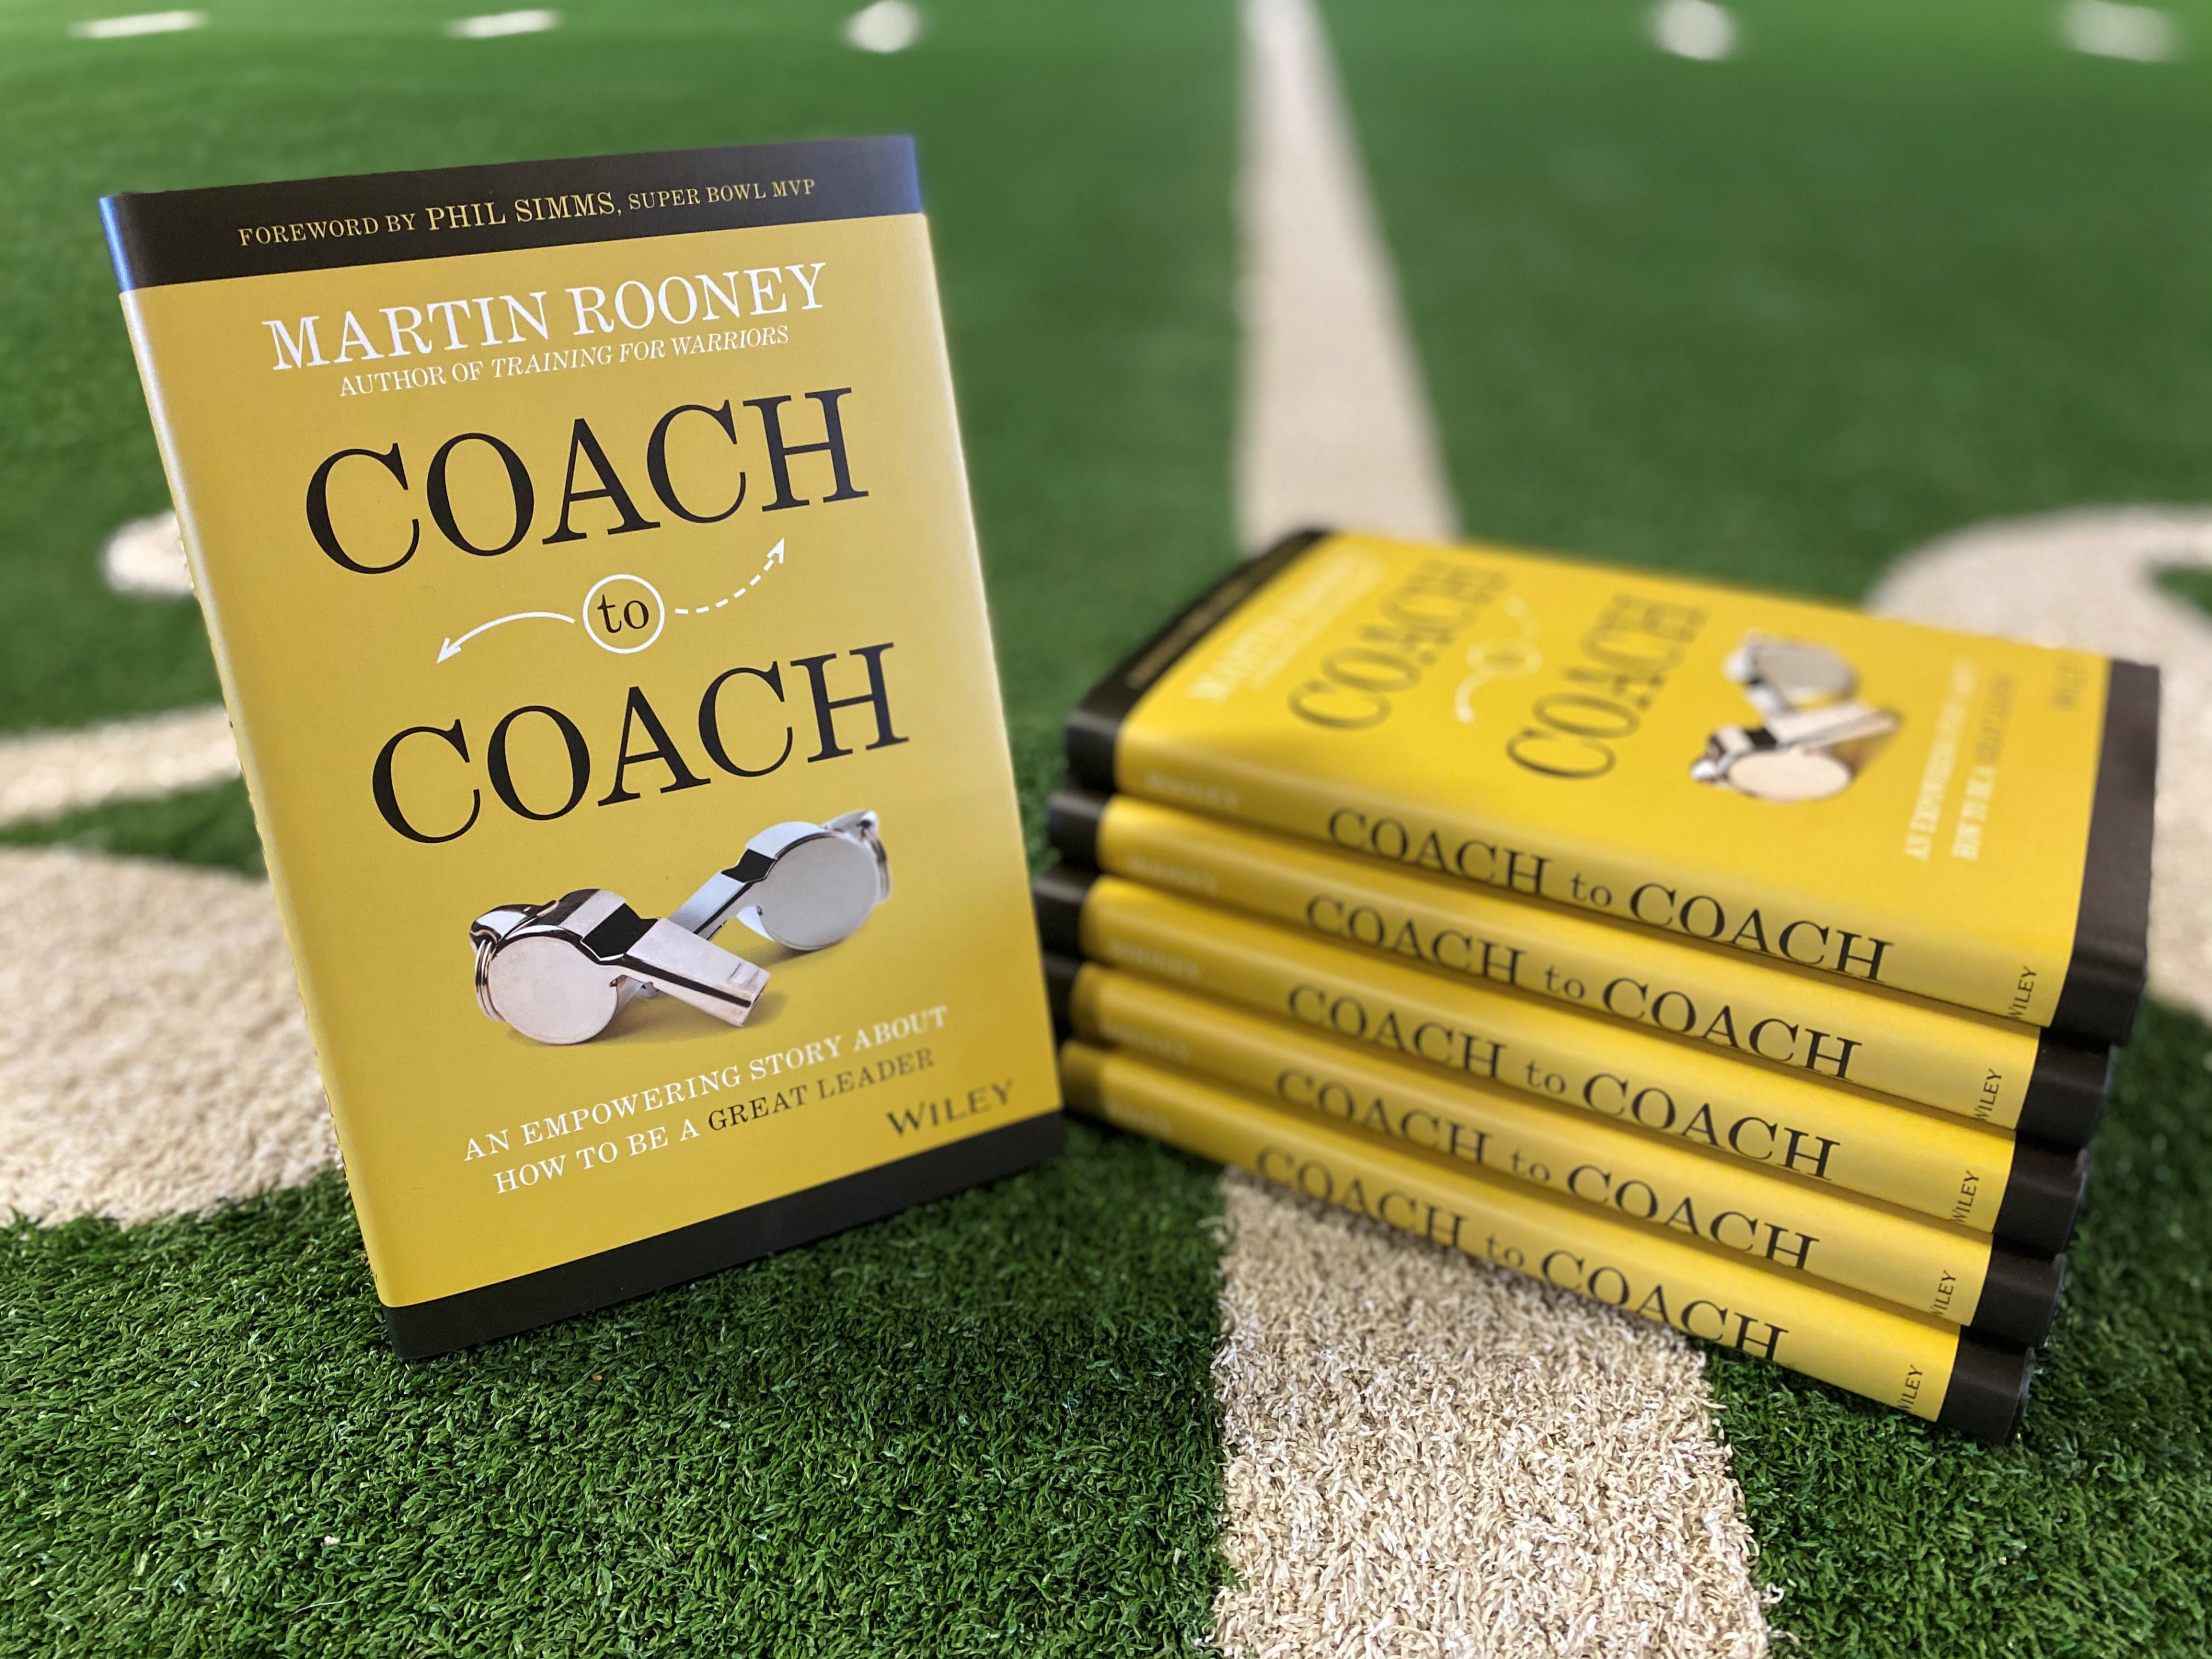 The cover of “Coach to Coach: An Empowering Story About How to Be a Great Leader” 